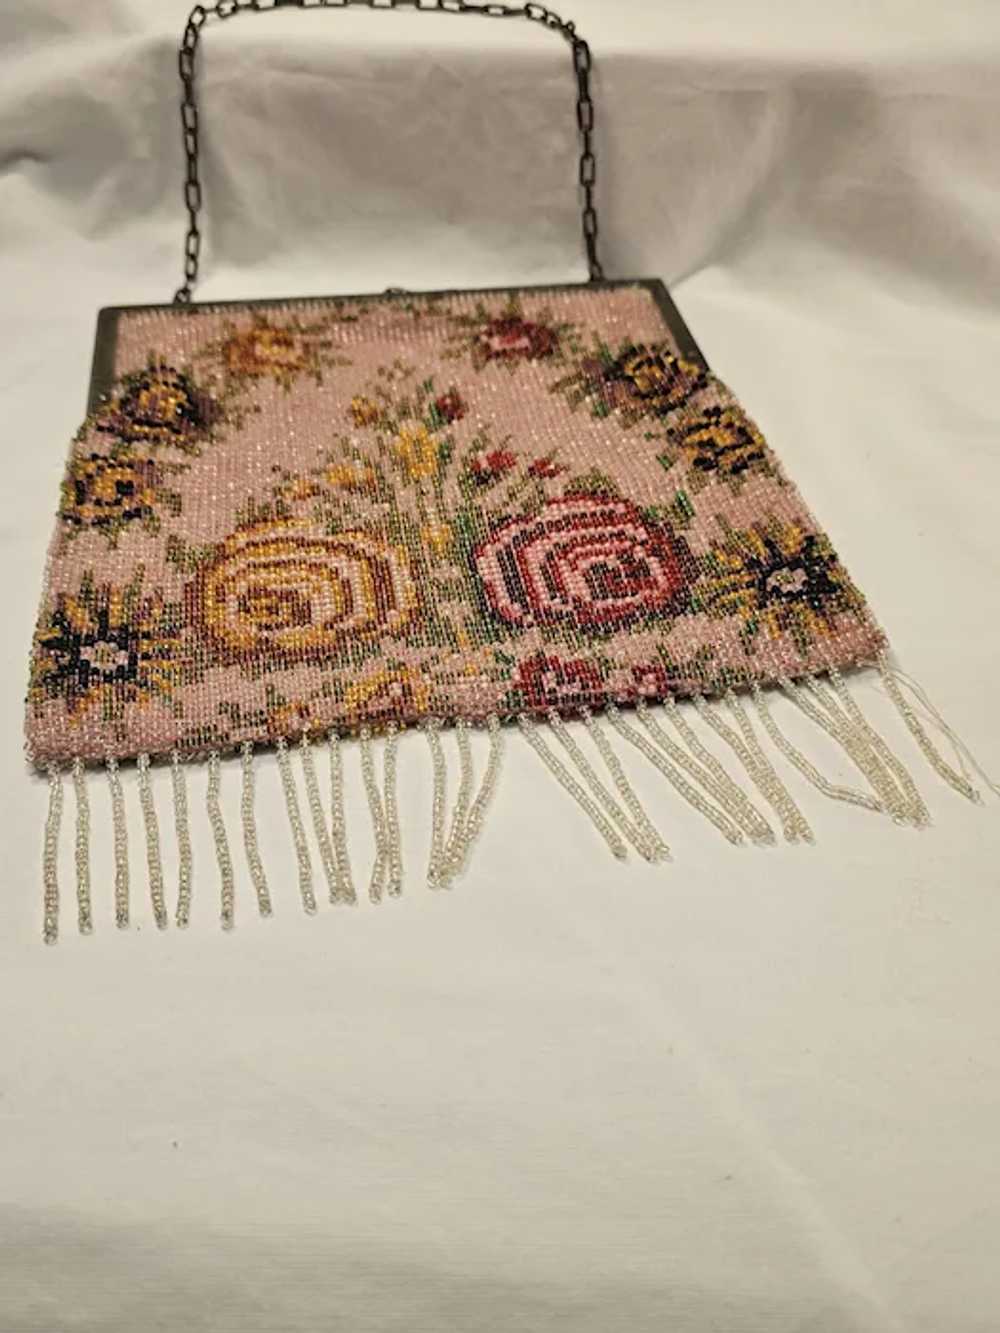 Antique Beaded Pink Handbag with Roses - image 2